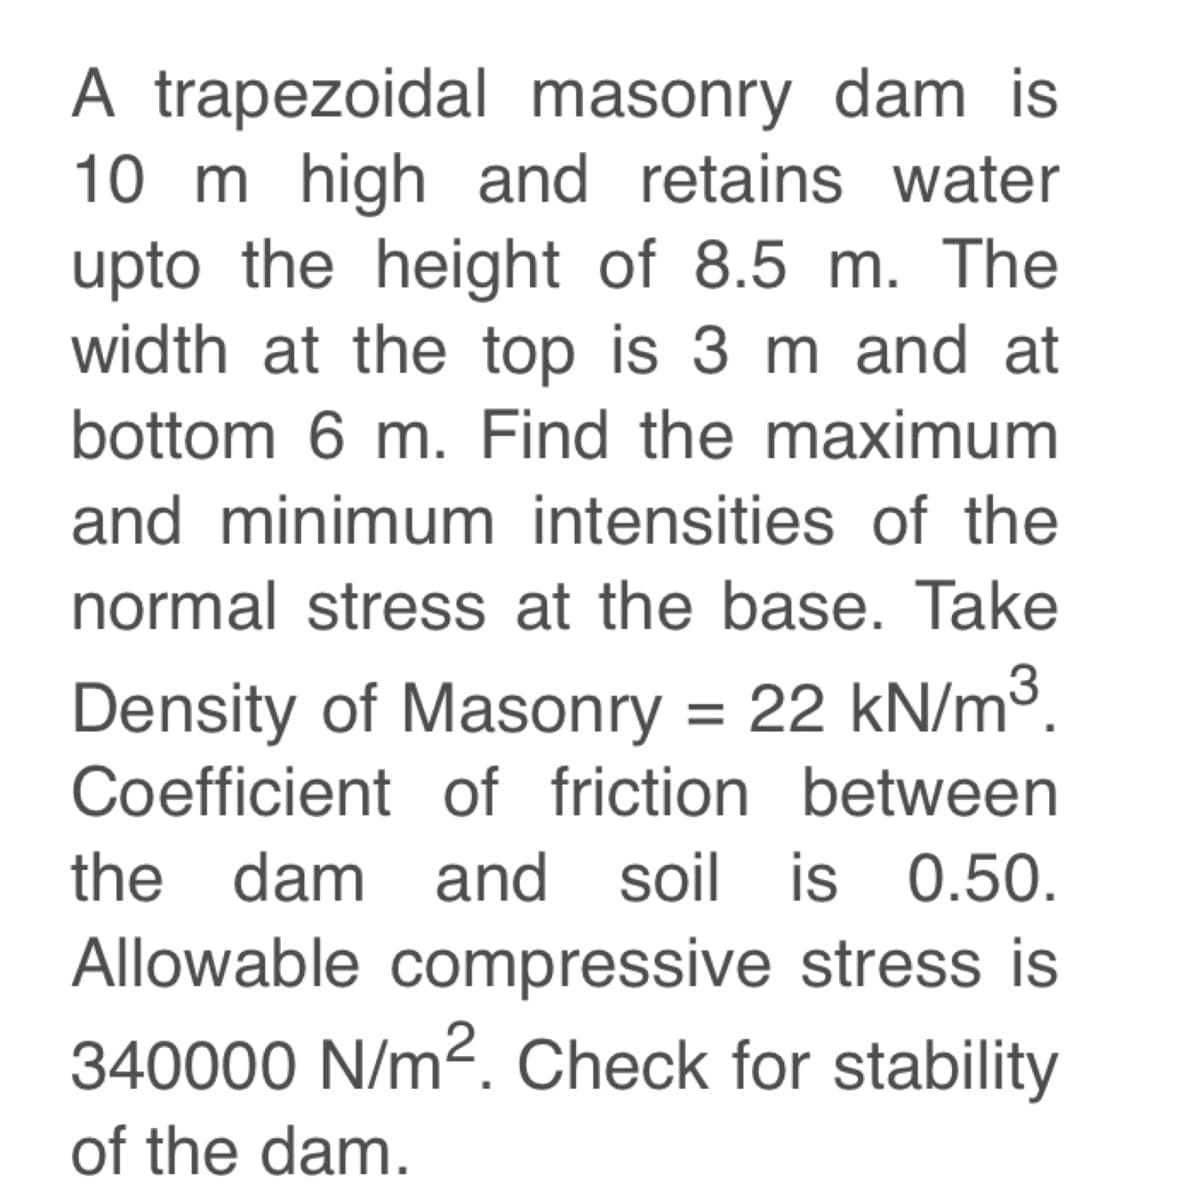 A trapezoidal masonry dam is
10 m high and retains water
upto the height of 8.5 m. The
width at the top is 3 m and at
bottom 6 m. Find the maximum
and minimum intensities of the
normal stress at the base. Take
Density of Masonry = 22 kN/m³.
Coefficient of friction between
the dam and soil is 0.50.
Allowable compressive stress is
340000 N/m². Check for stability
of the dam.